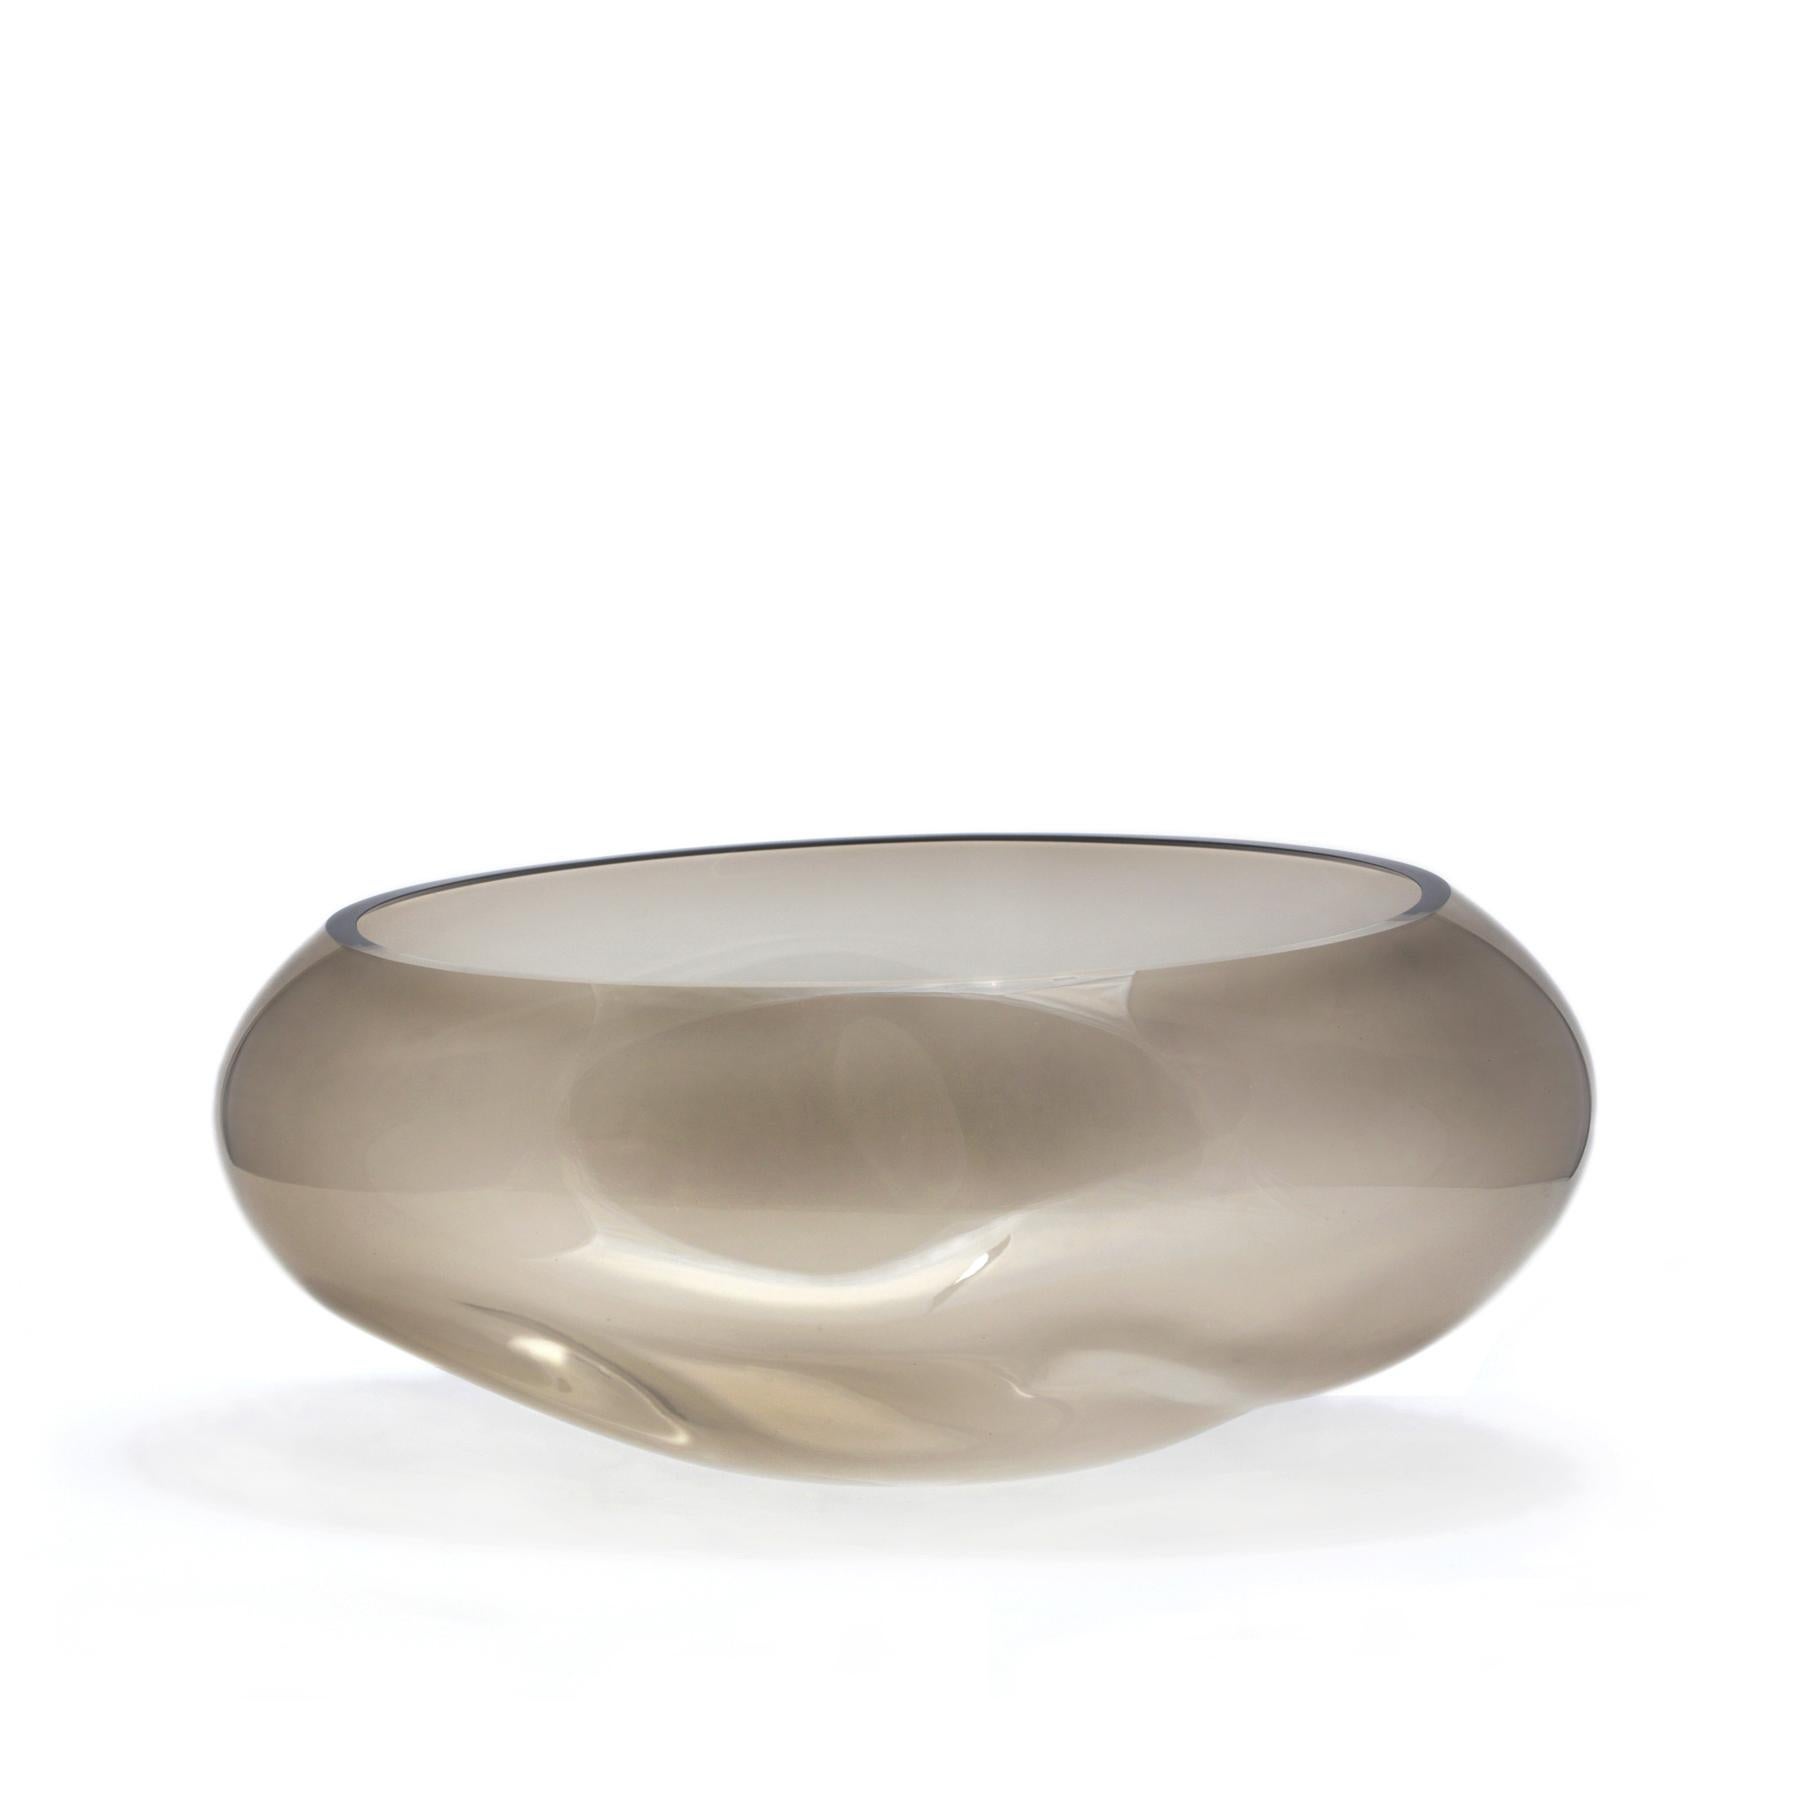 Supernova I Silver Smoke M Bowl + Vase by ELOA
Material: Glass
Dimensions: D24 x W37 x H17 cm
Also Available in different colours and dimensions.

SUPERNOVA is a rare and magical visual phenomenon that manifests itself as a quick brightness.